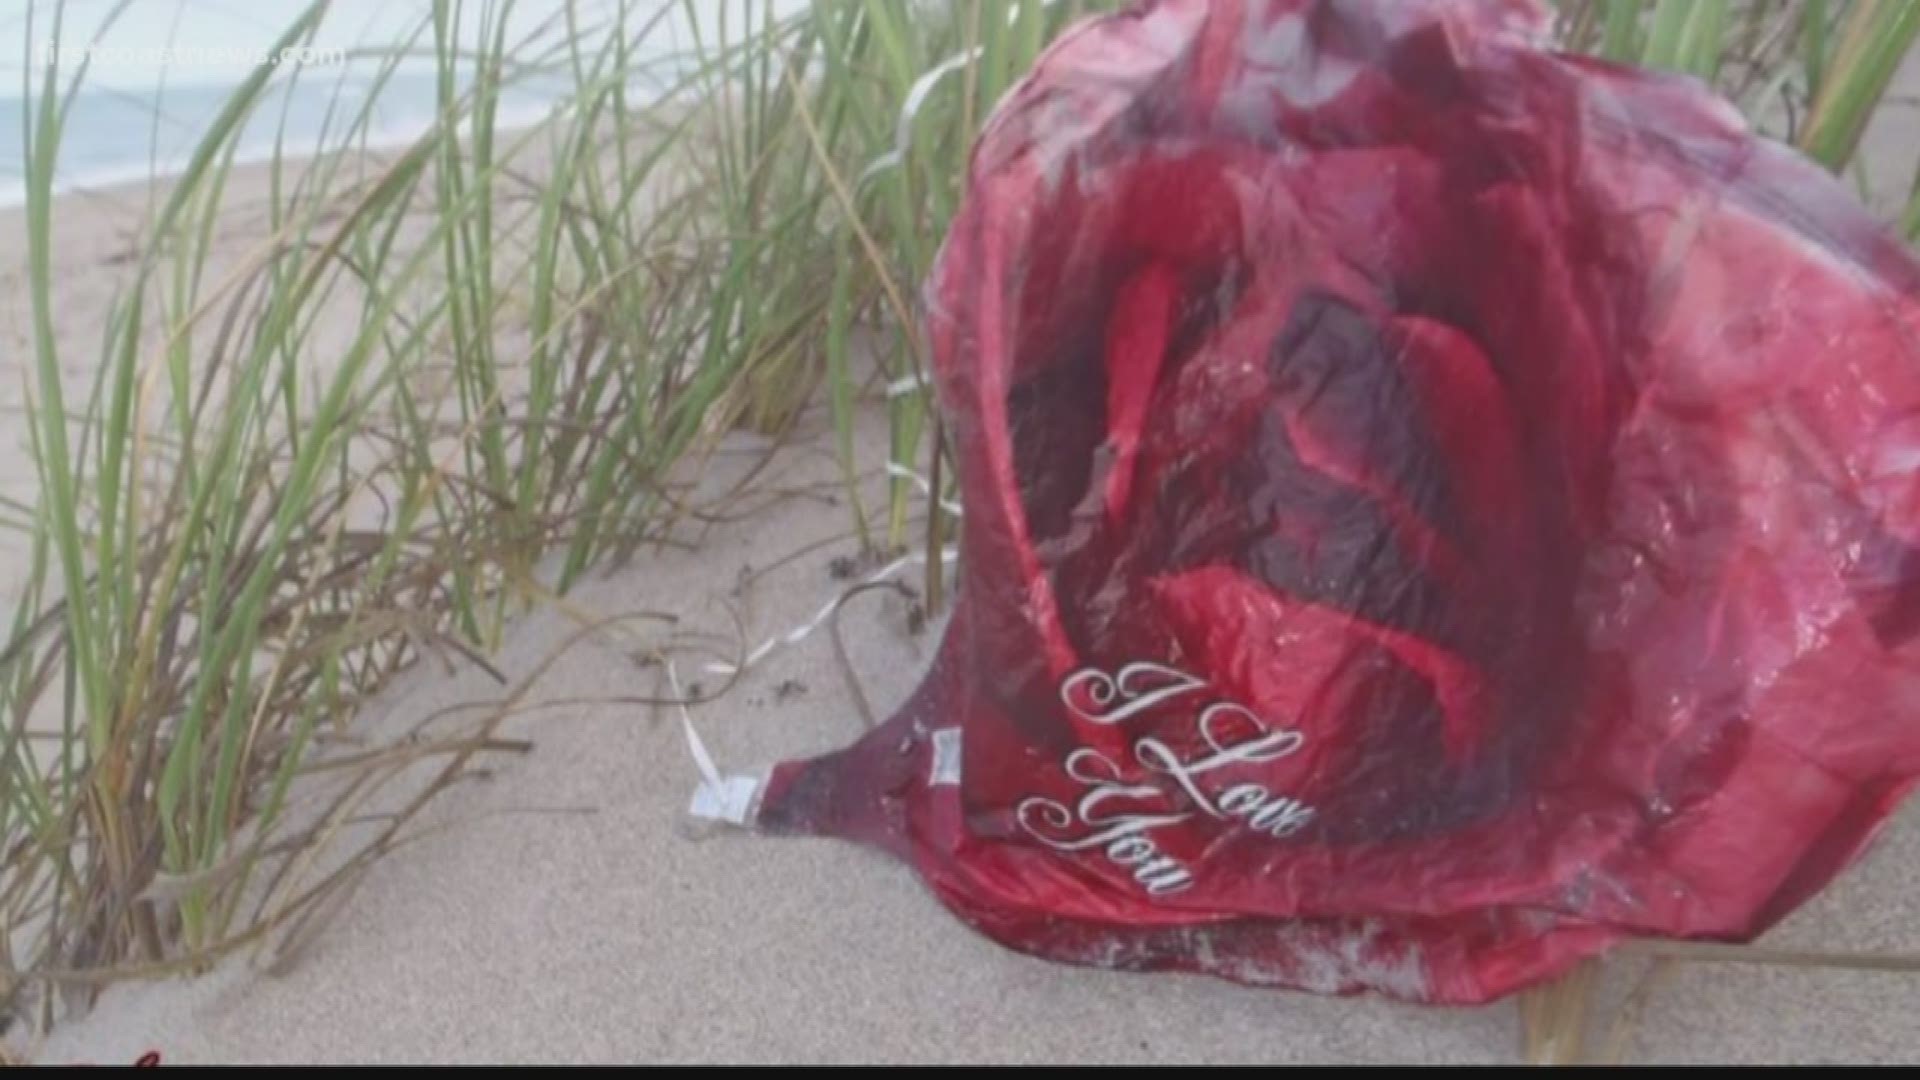 It's already illegal statewide, but Fernandina Beach is doubling down on a balloon release ban to protect the environment.